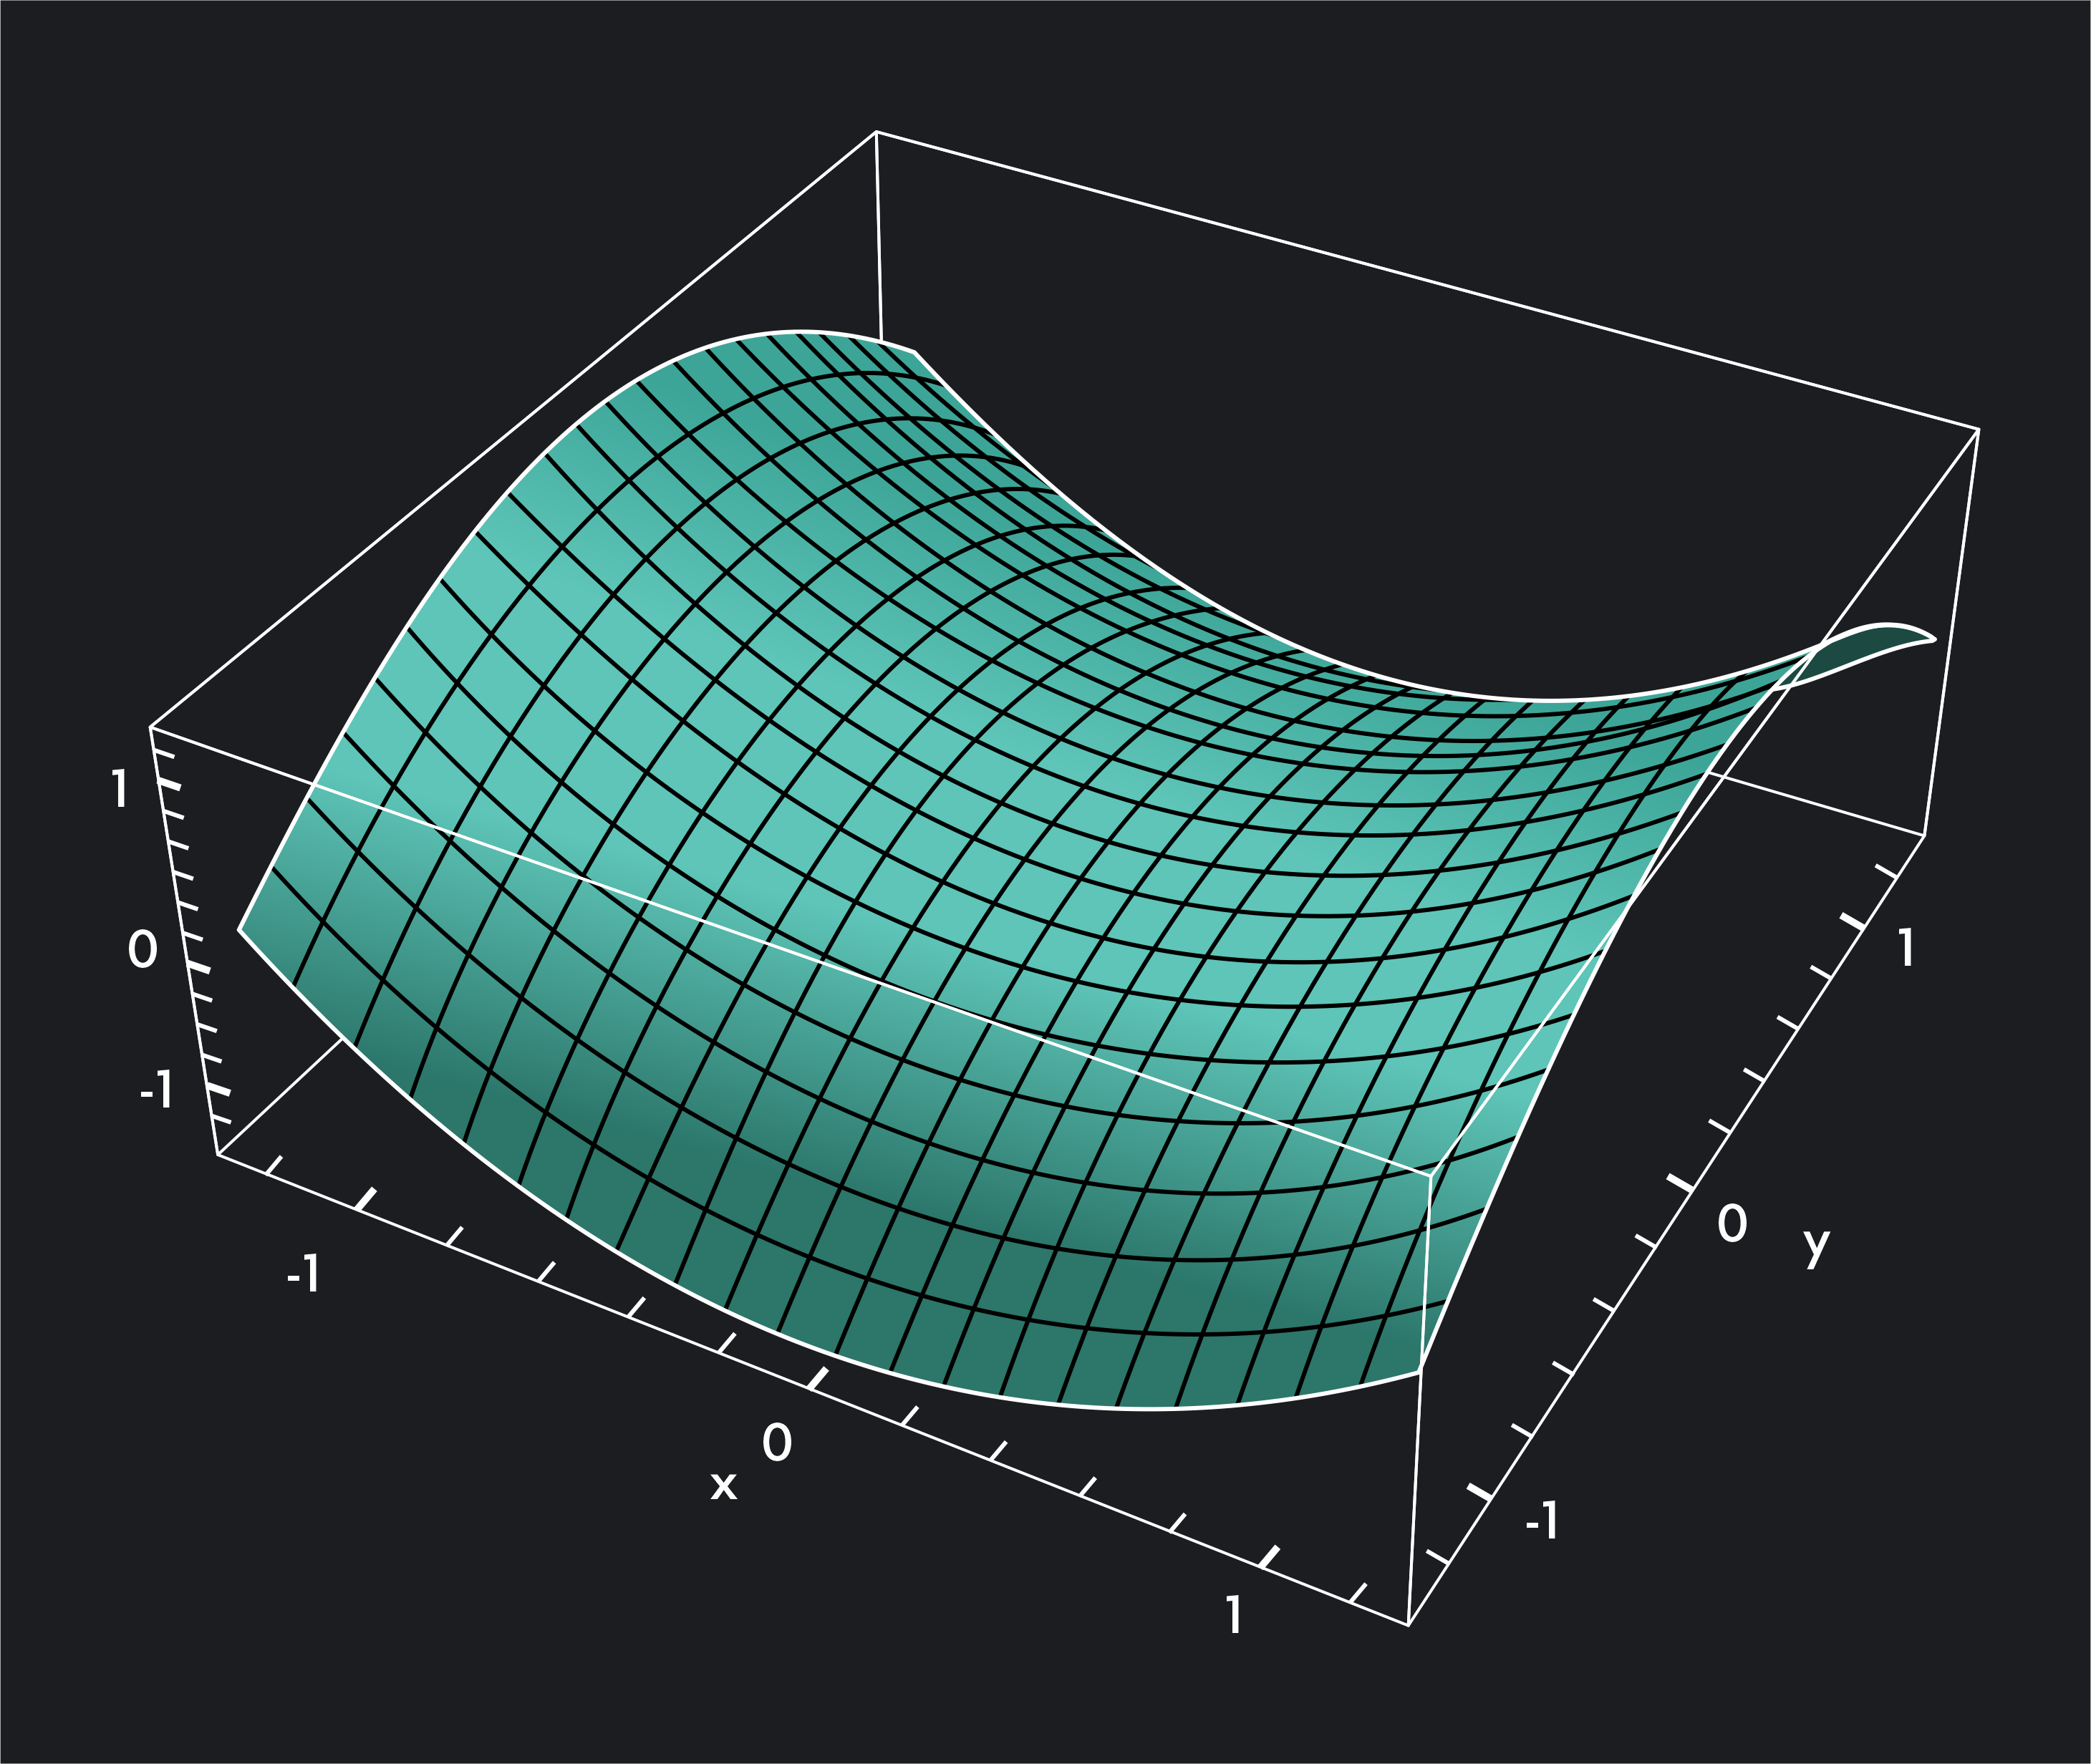 Graph of saddle point